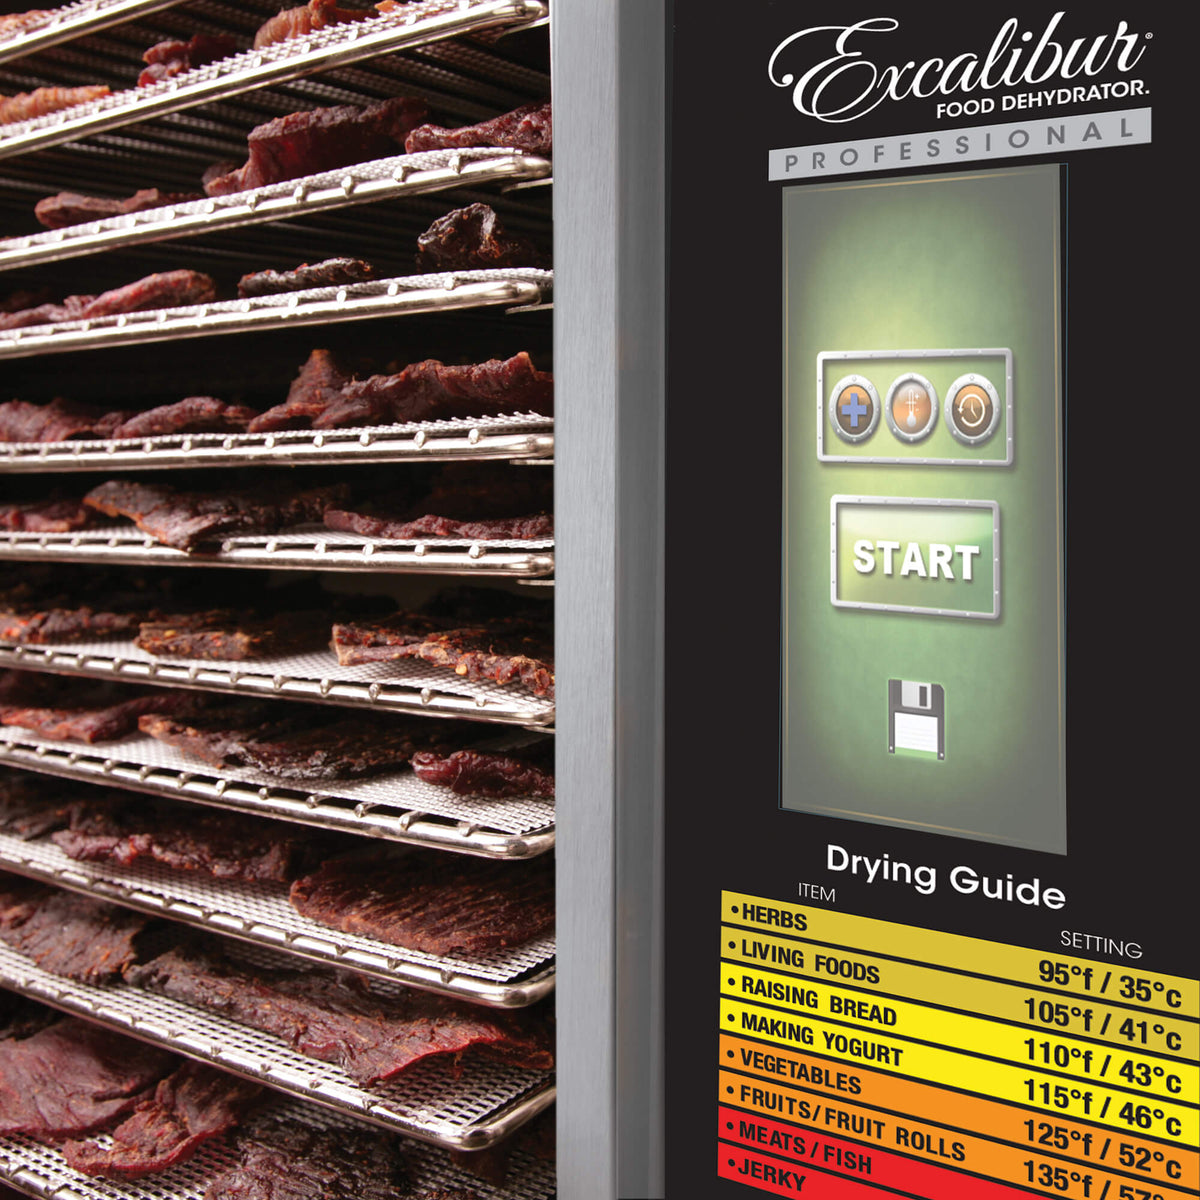 Excalibur COMM1 12 tray stainless steel commercial digital dehydrator control panel with jerky on the trays.